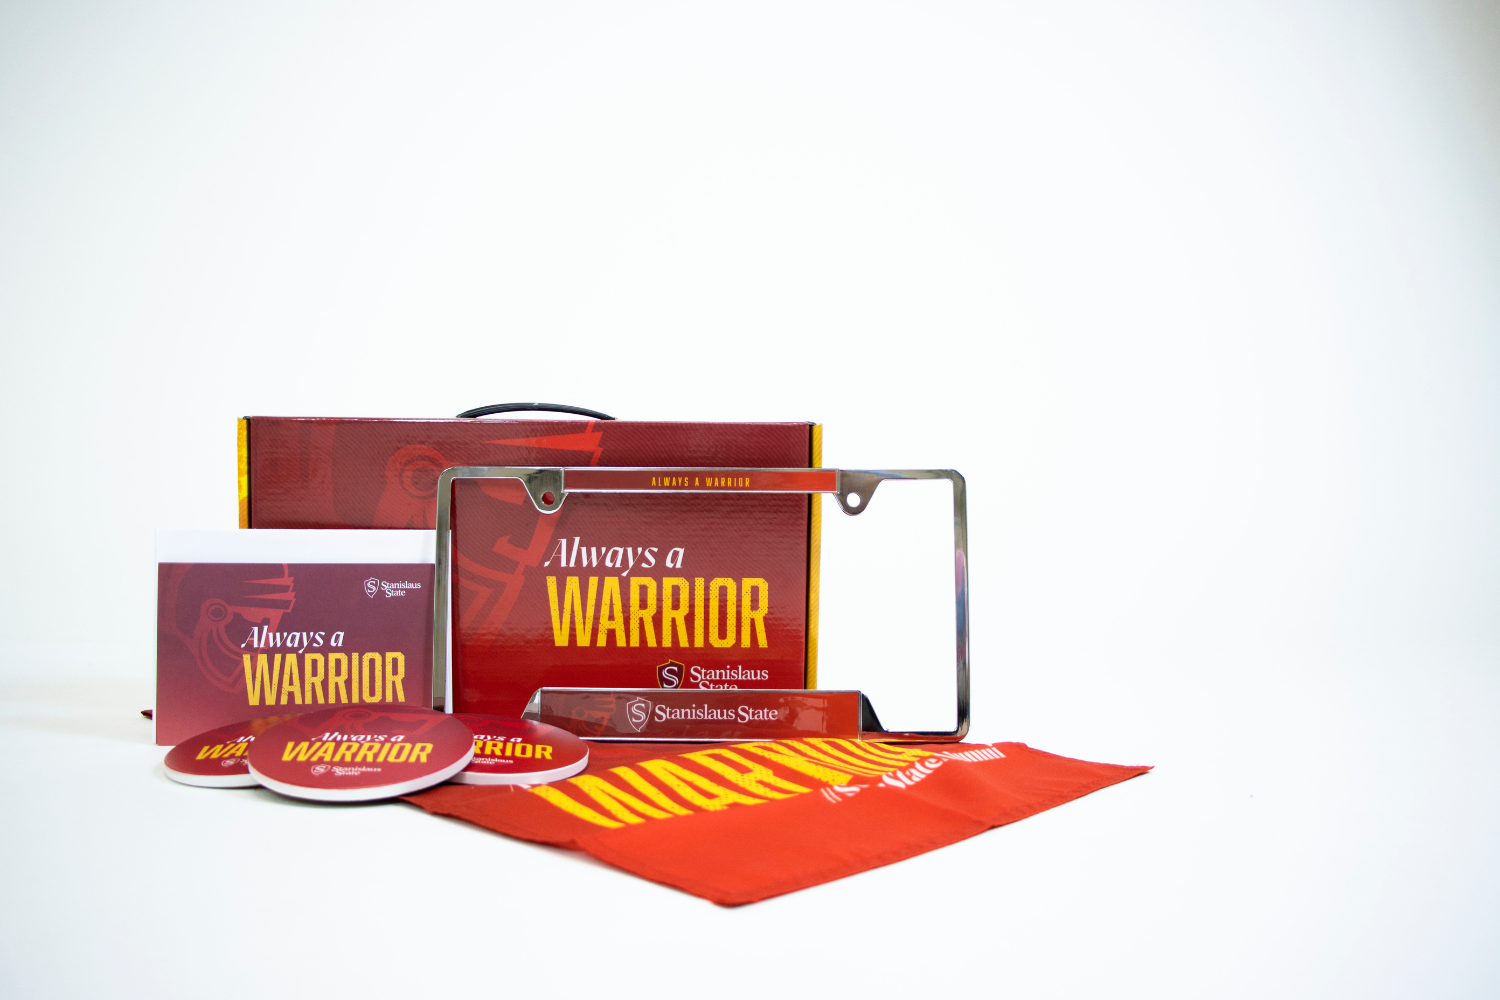 Image of a warrior grad pack.